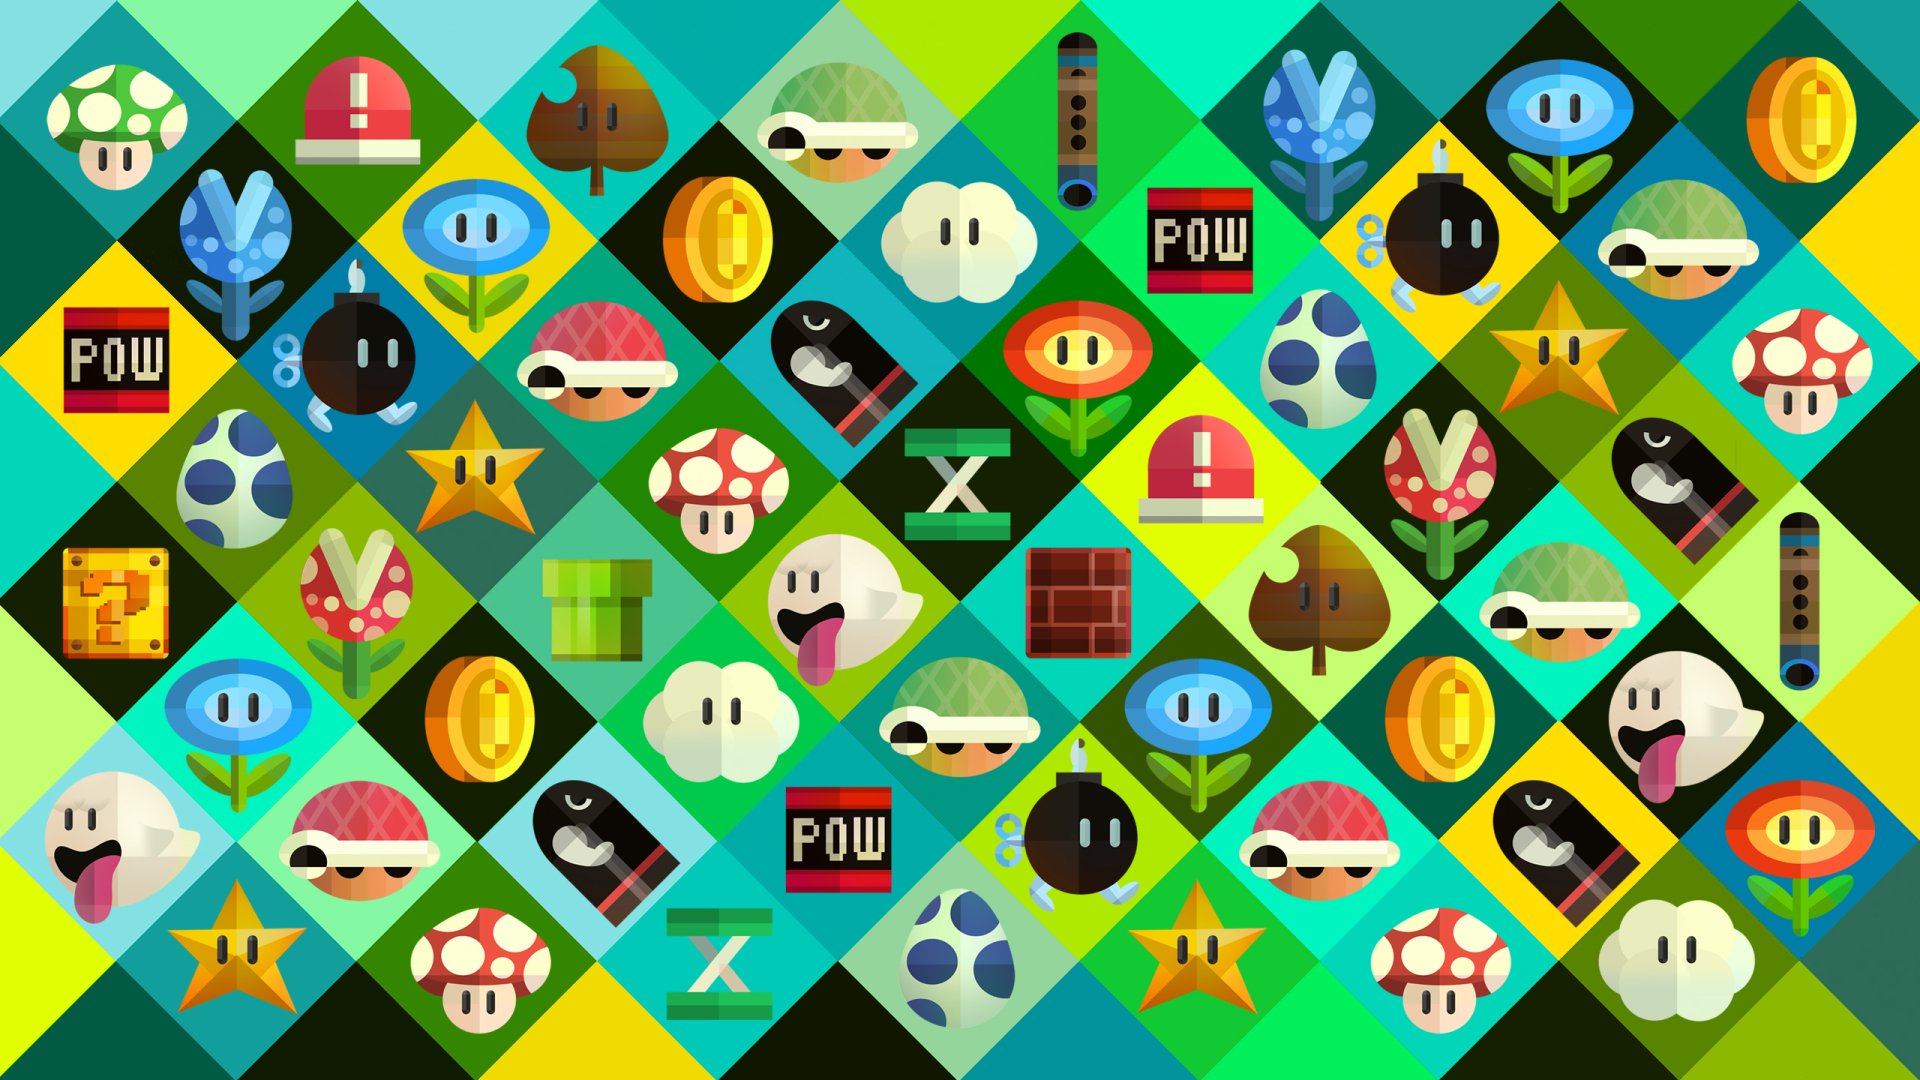 HD desktop wallpaper with a colorful collage of Mario-themed icons and elements.